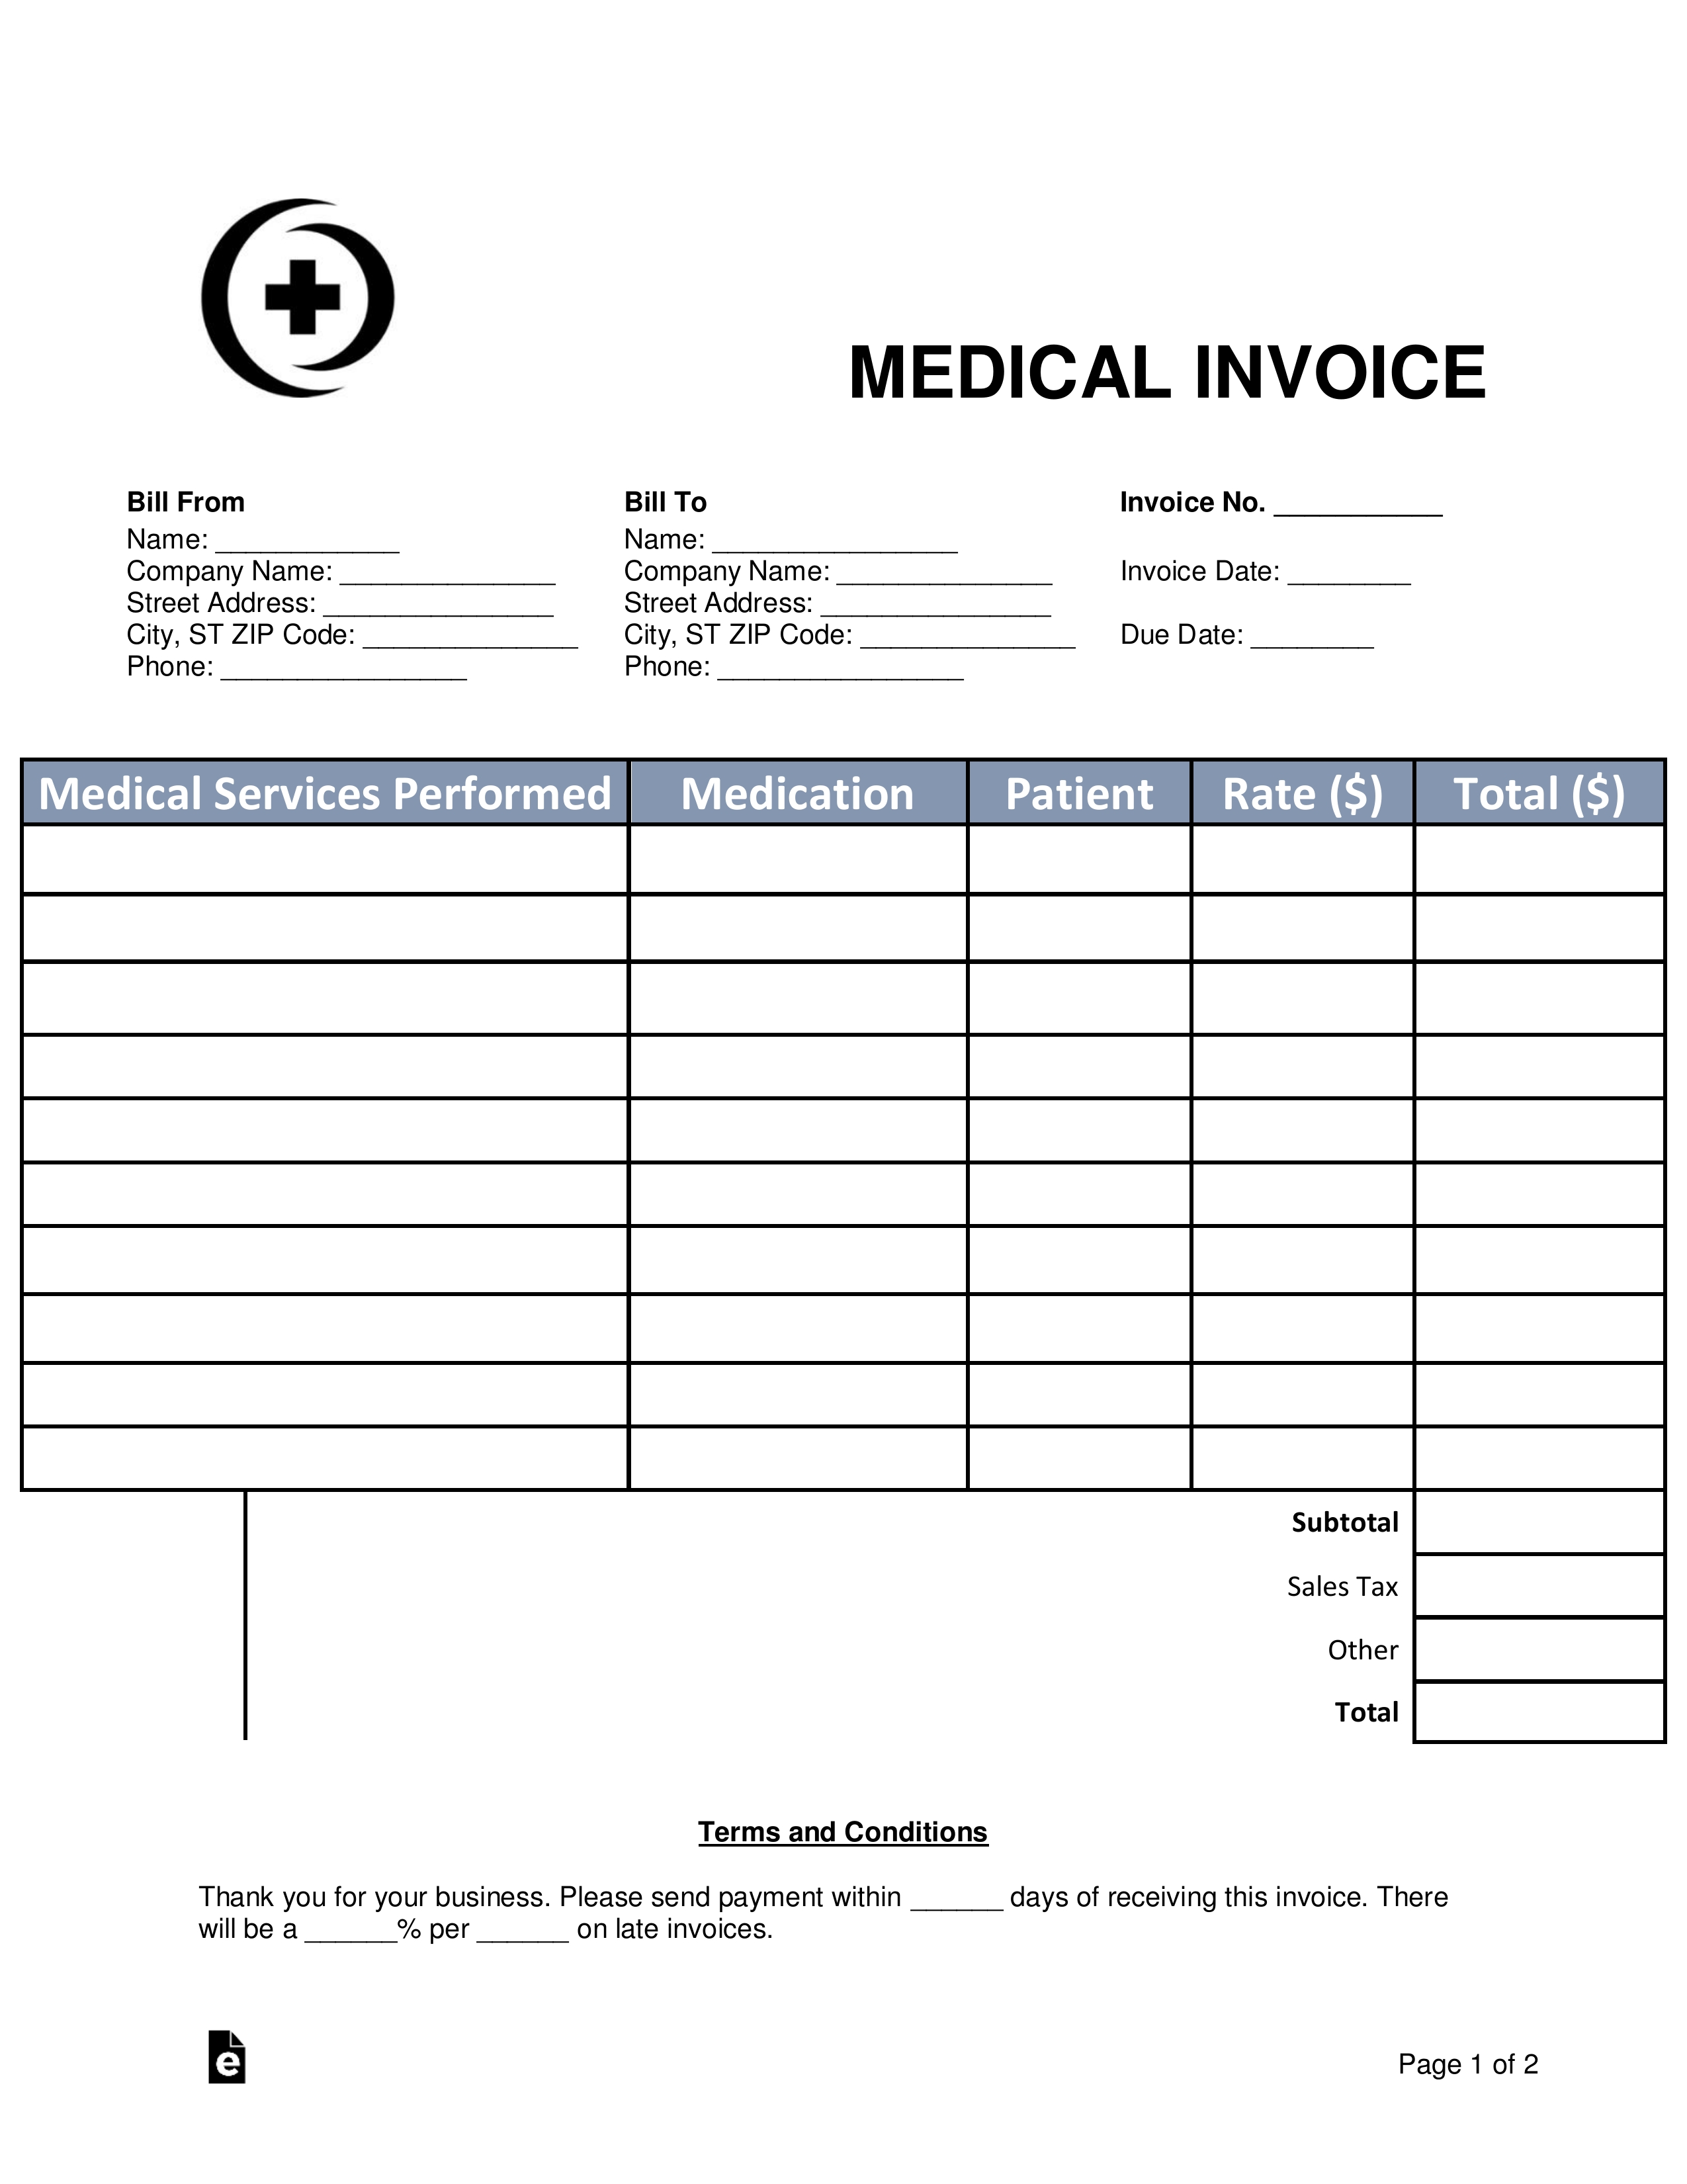 free medical invoice template word pdf eforms free dr office receipt templates